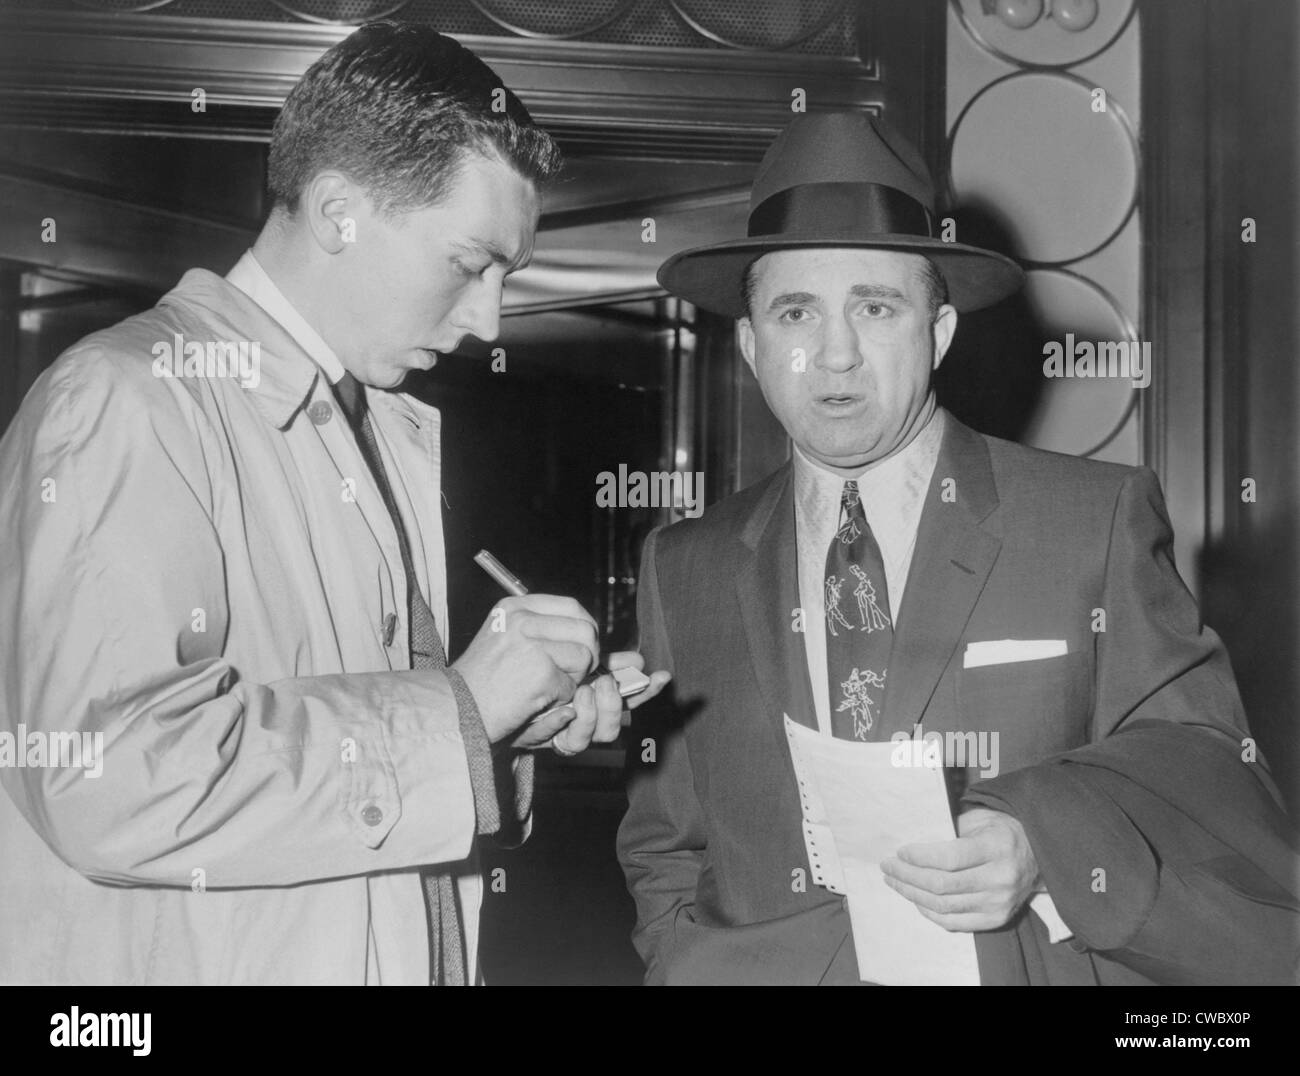 Mickey Cohen (1913-1976), speaking with reporter in New York City on May 20, 1957. In the 1950's, Cohen was a celebrity Stock Photo